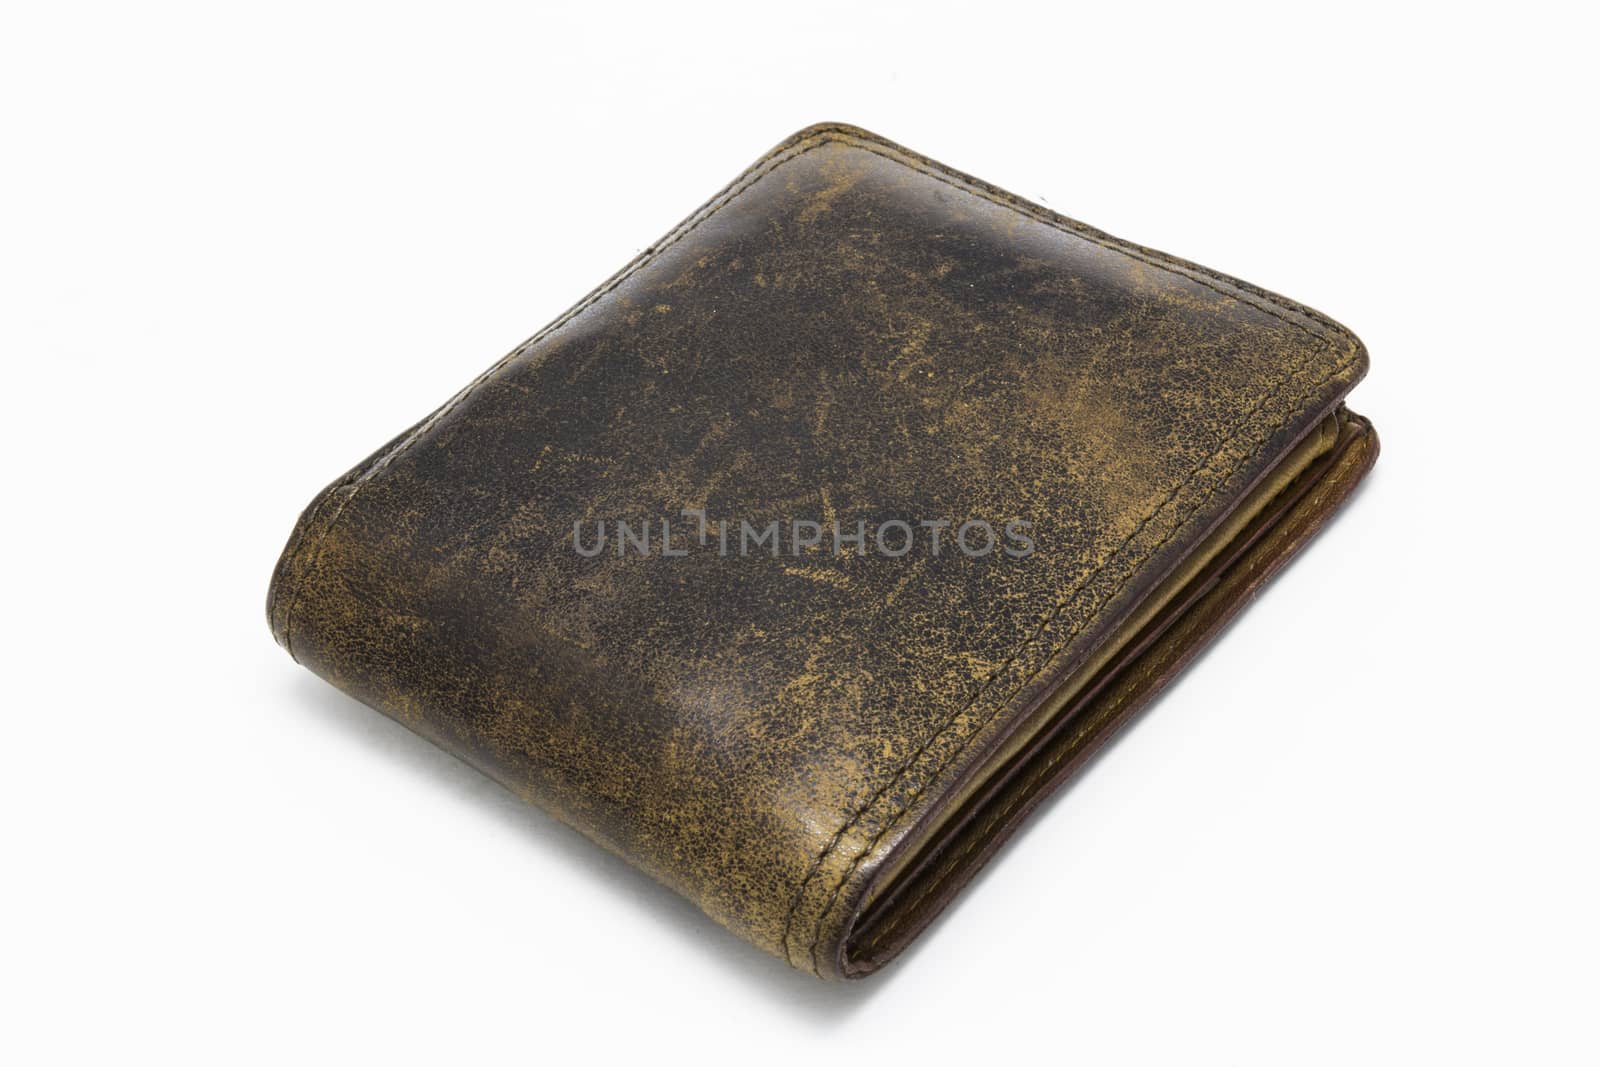 leather wallet isolated on white background